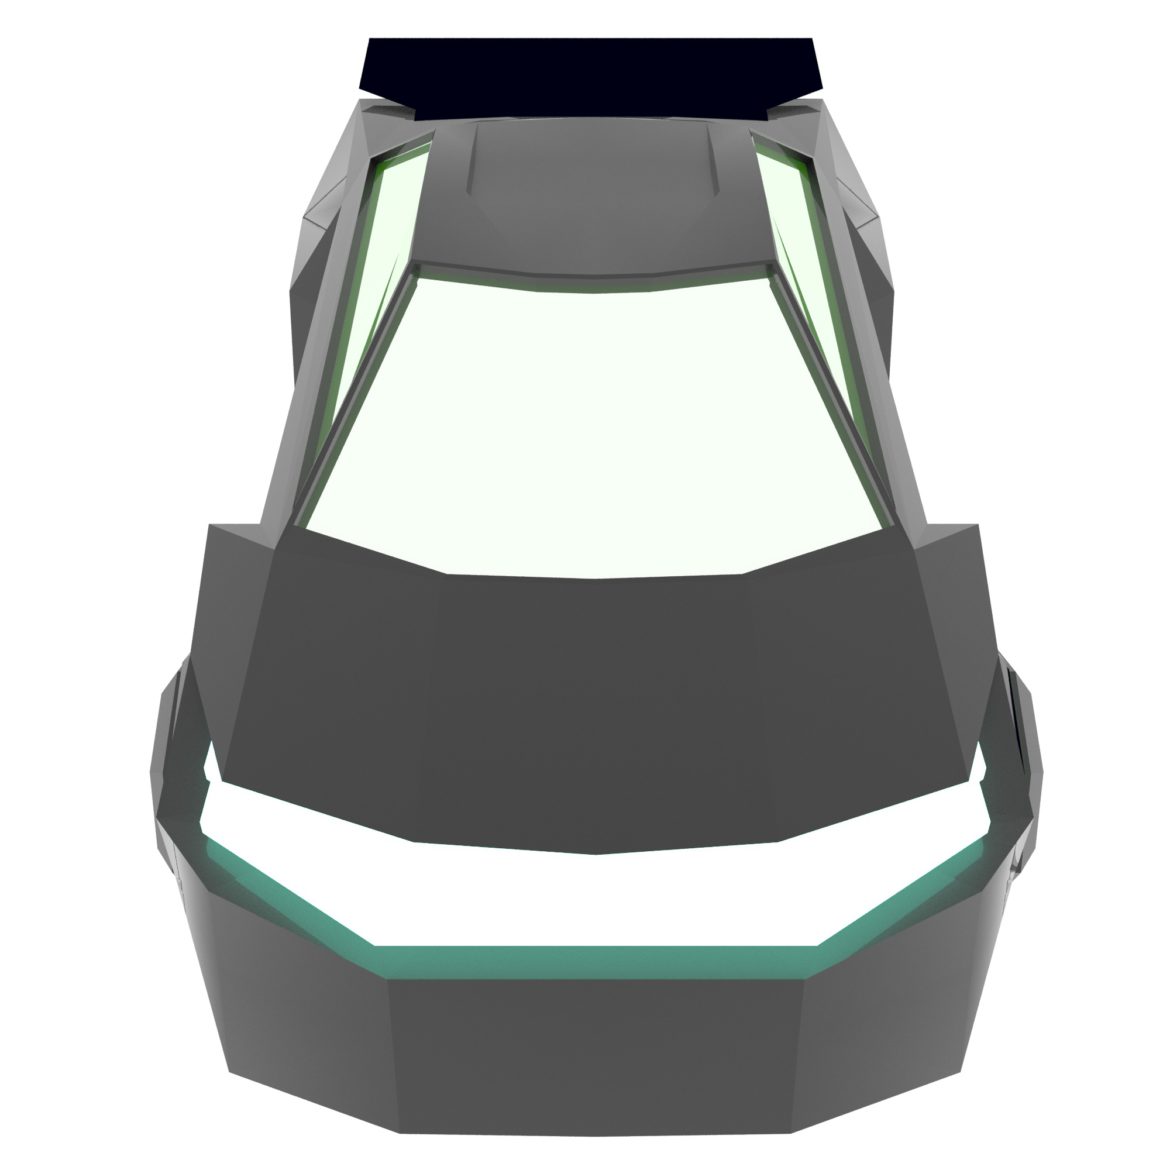  <a class="continue" href="https://www.flatpyramid.com/3d-models/vehicles-3d-models/watercraft/other/neon-car/">Continue Reading<span> Neon car</span></a>